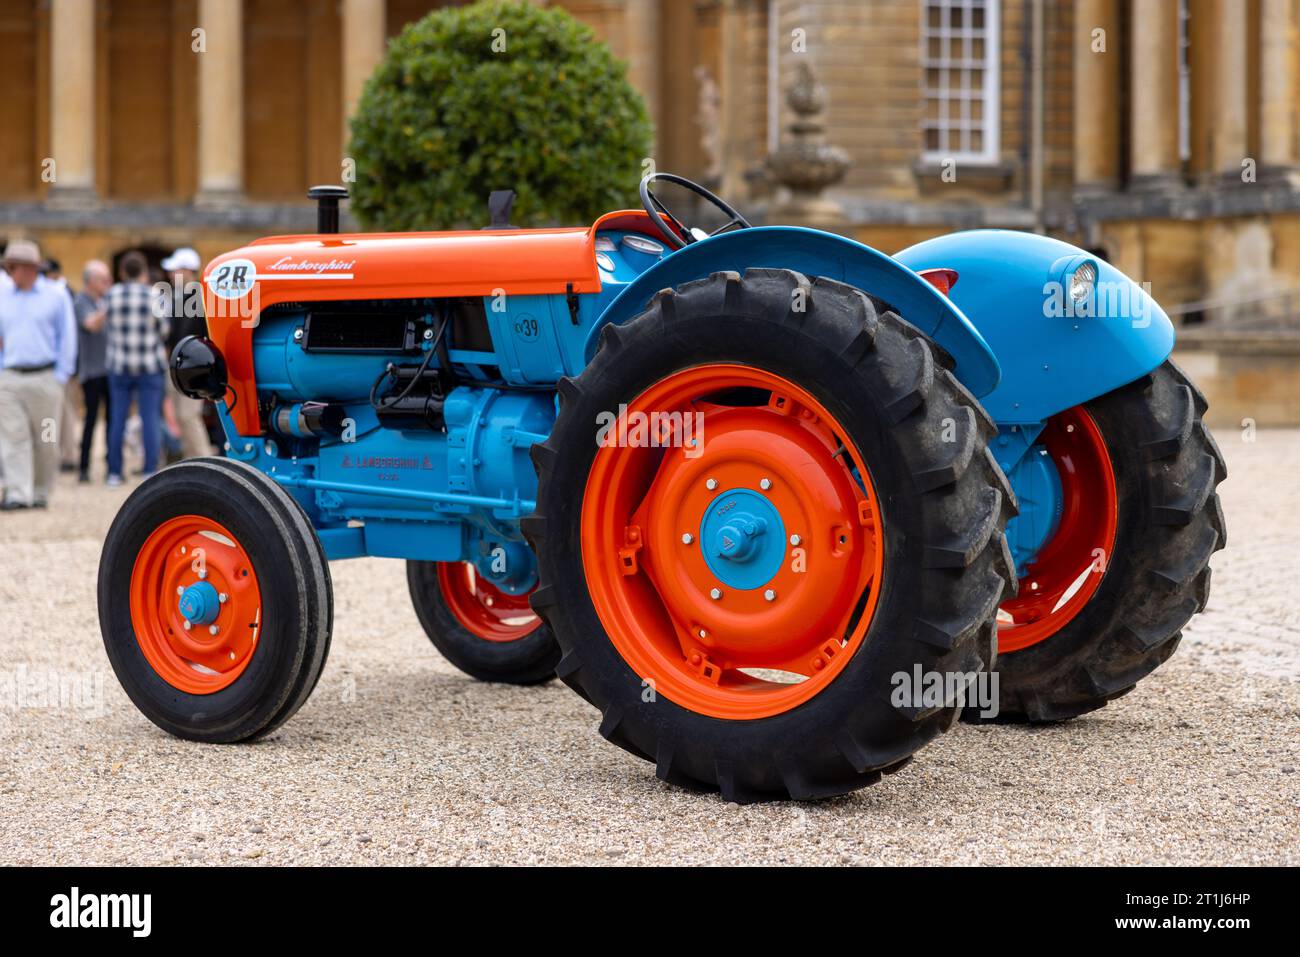 1964 Lamborghini 2R Tractor, on display at the Salon Privé Concours d’Elégance motor show held at Blenheim Palace. Stock Photo